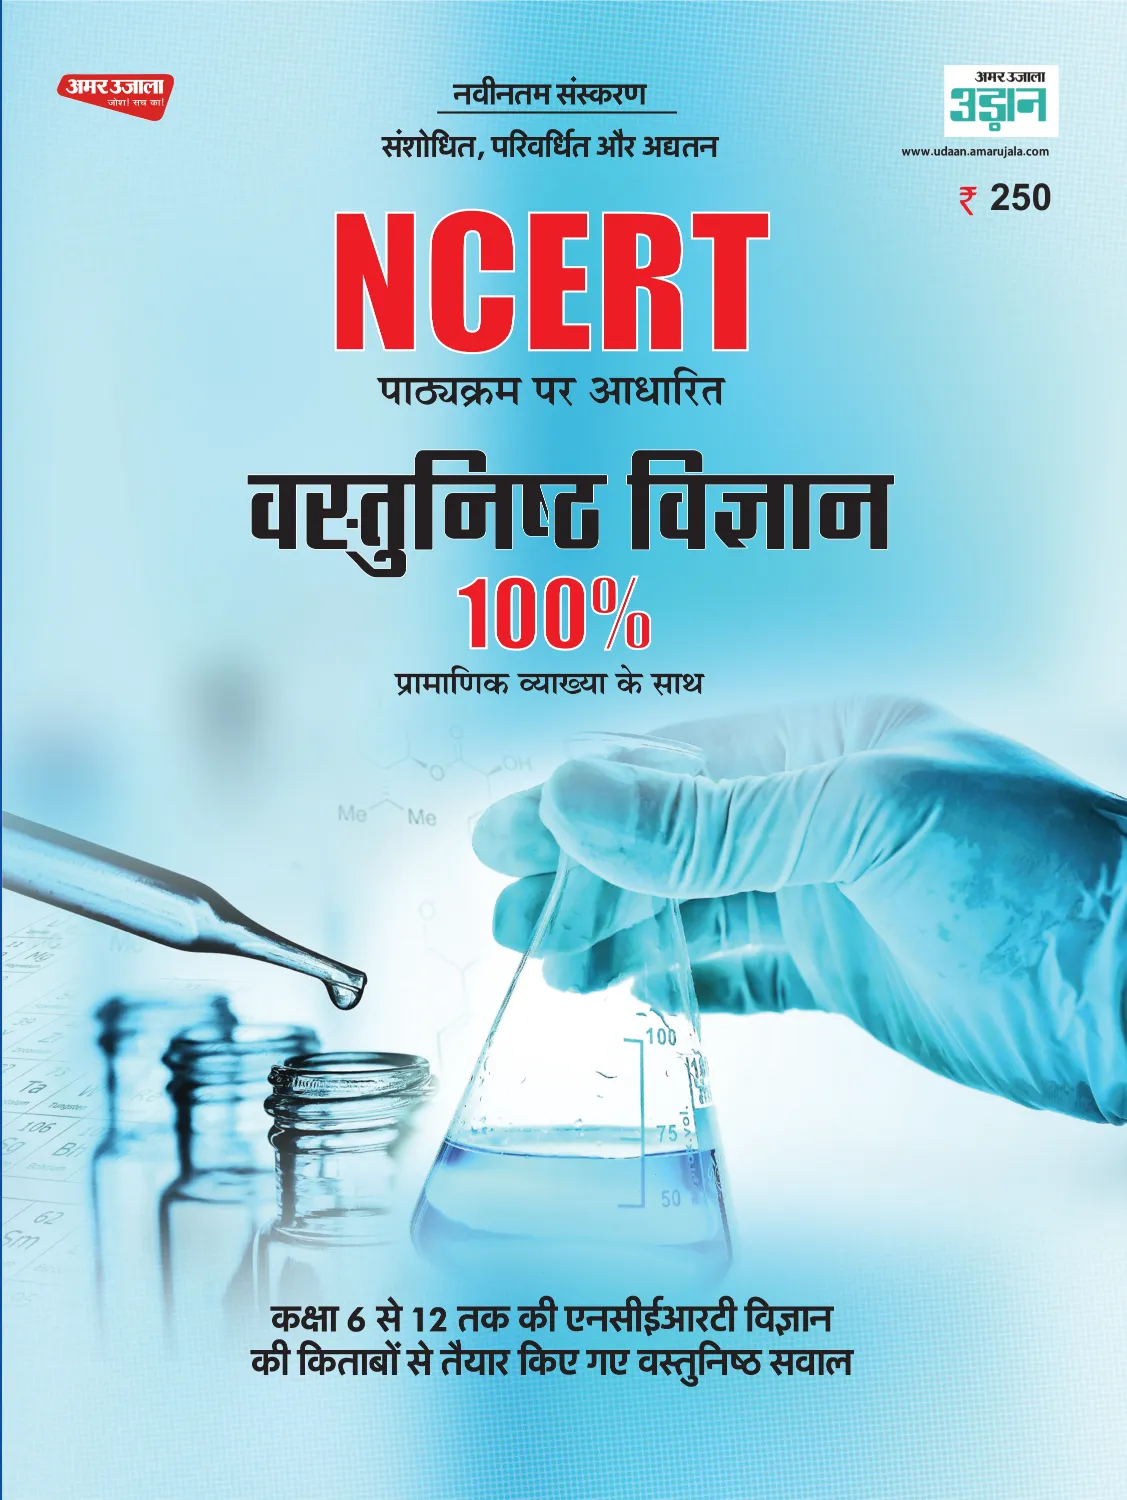 NCERT Objective Science